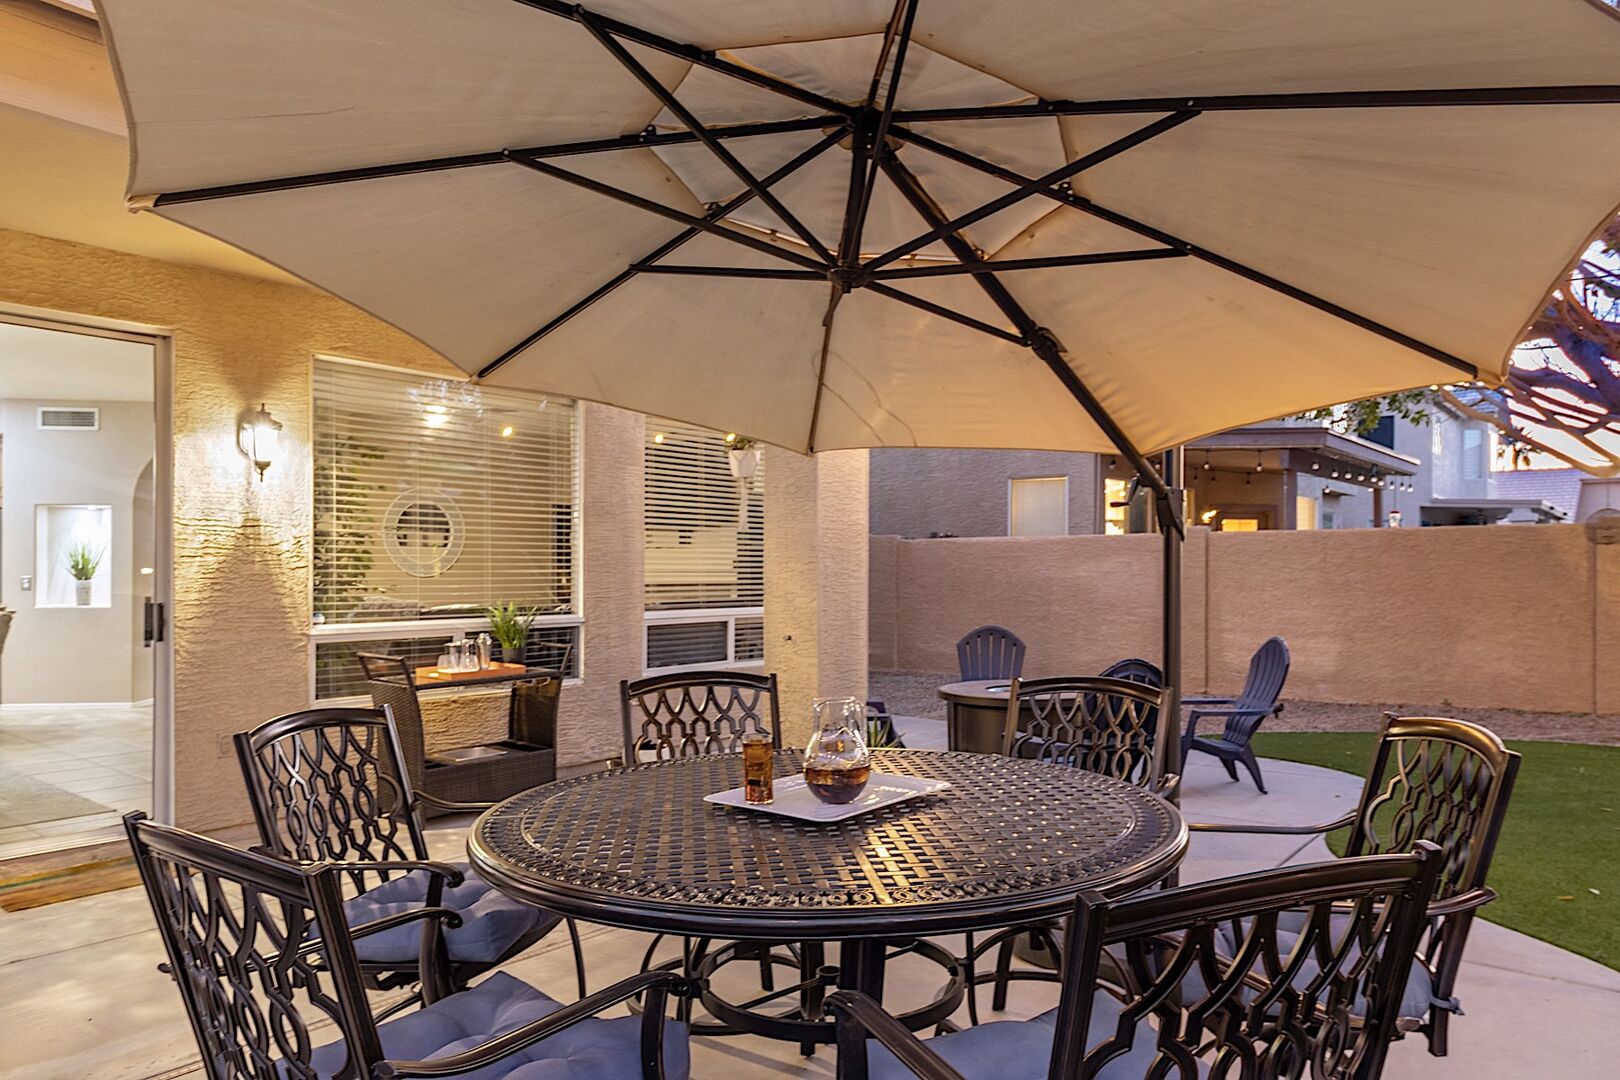 Outdoor dining area seats 6